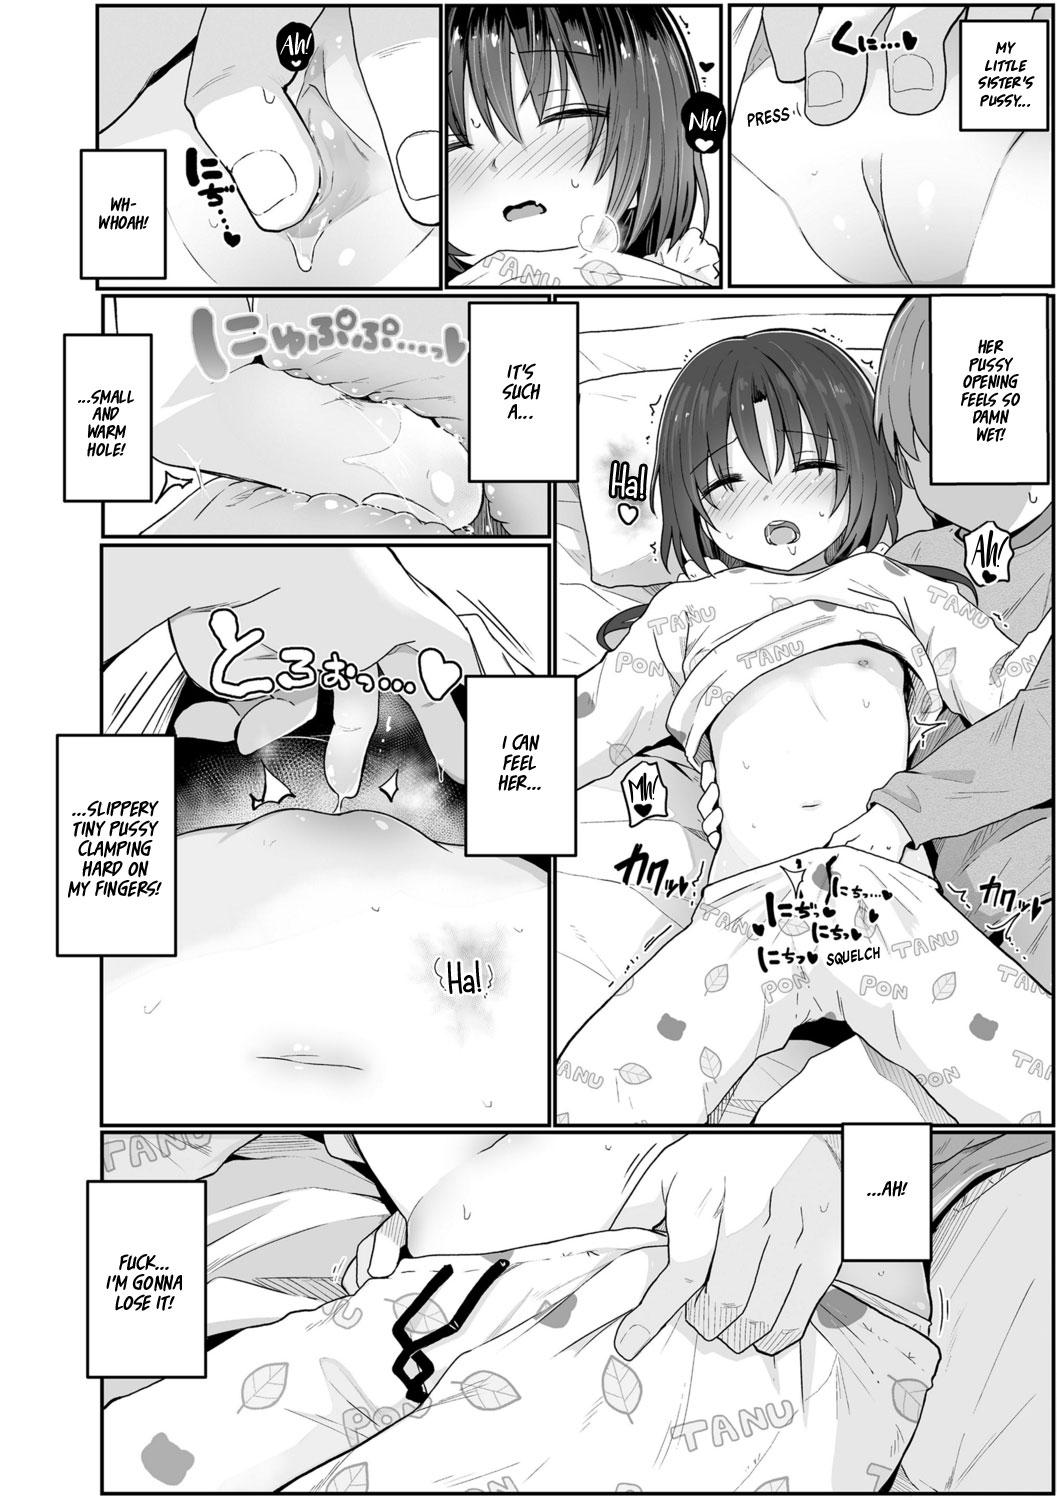 Animated Imouto no Nukumori | A Little Sister's warmth Free Amateur - Page 8